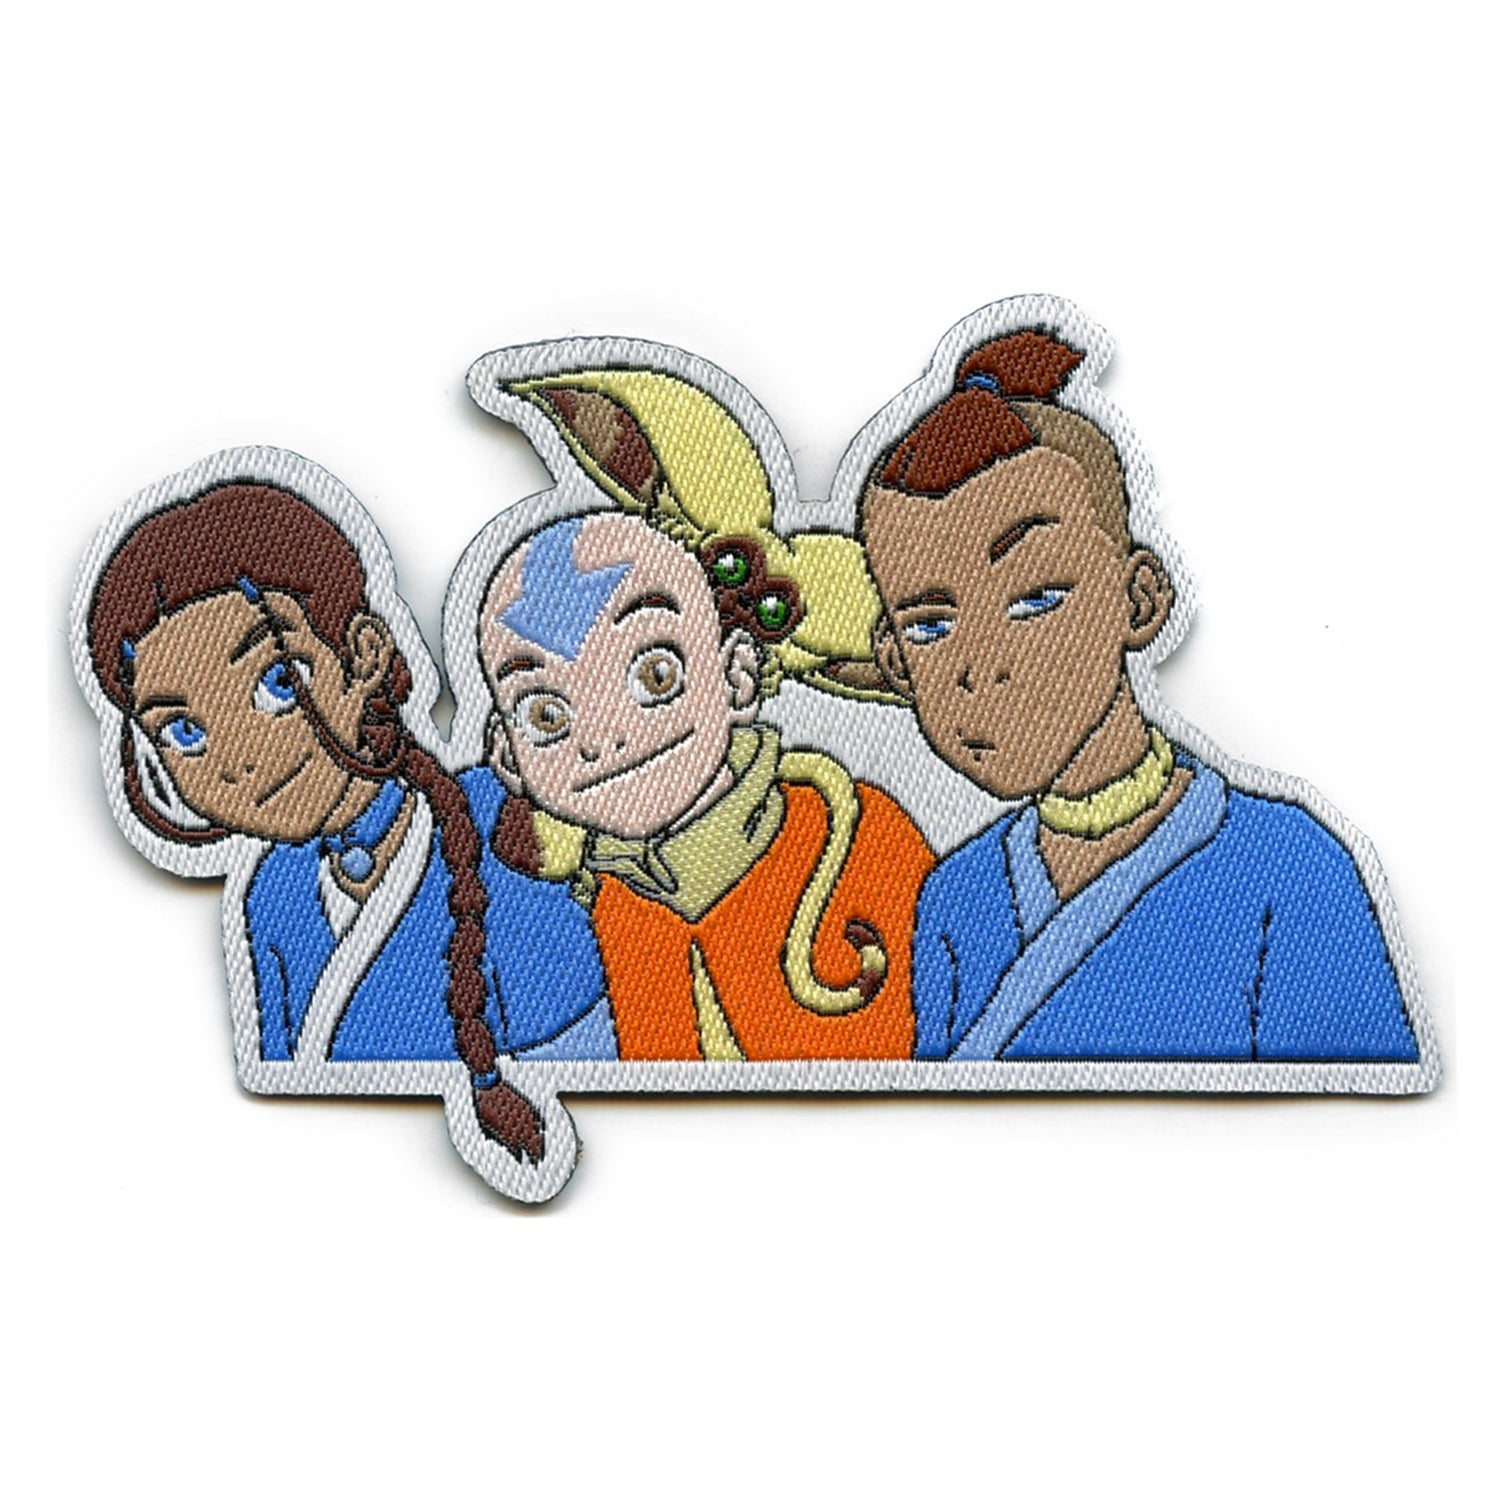 The Last Air Bender Patches